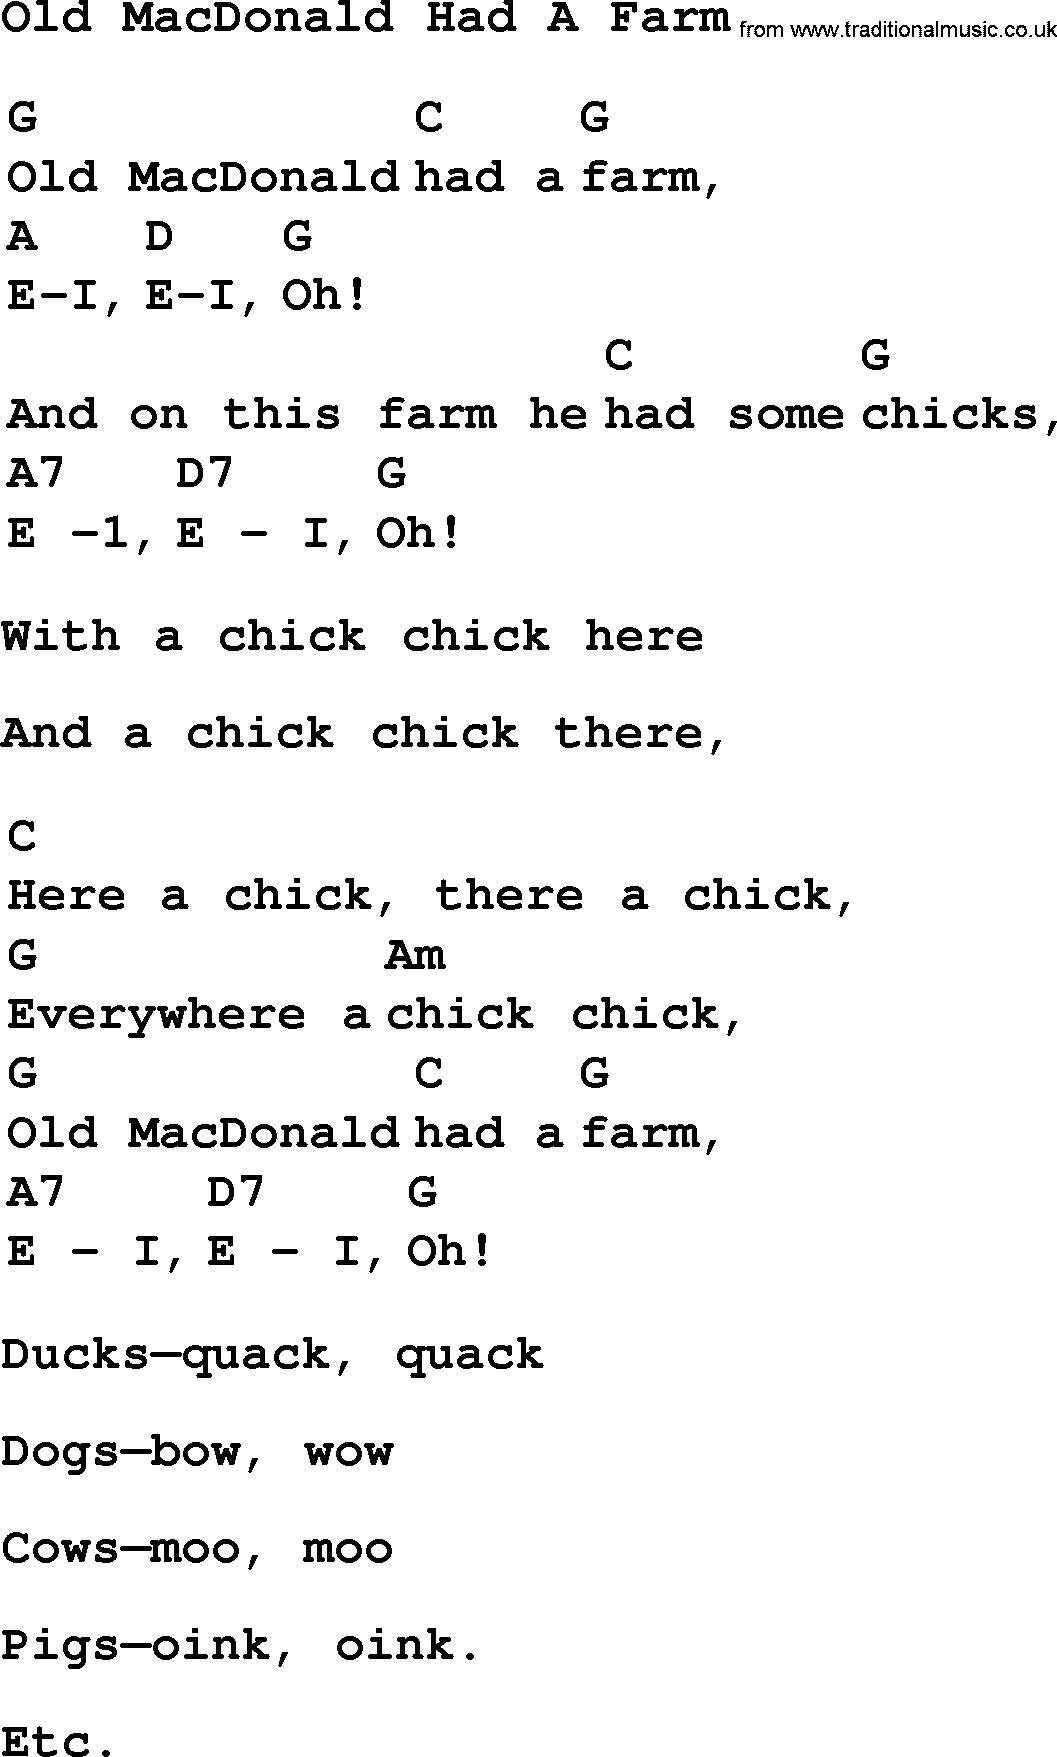 Top 1000 Most Popular Folk and Old-time Songs: Old MacDonald Had A Farm, lyrics and chords